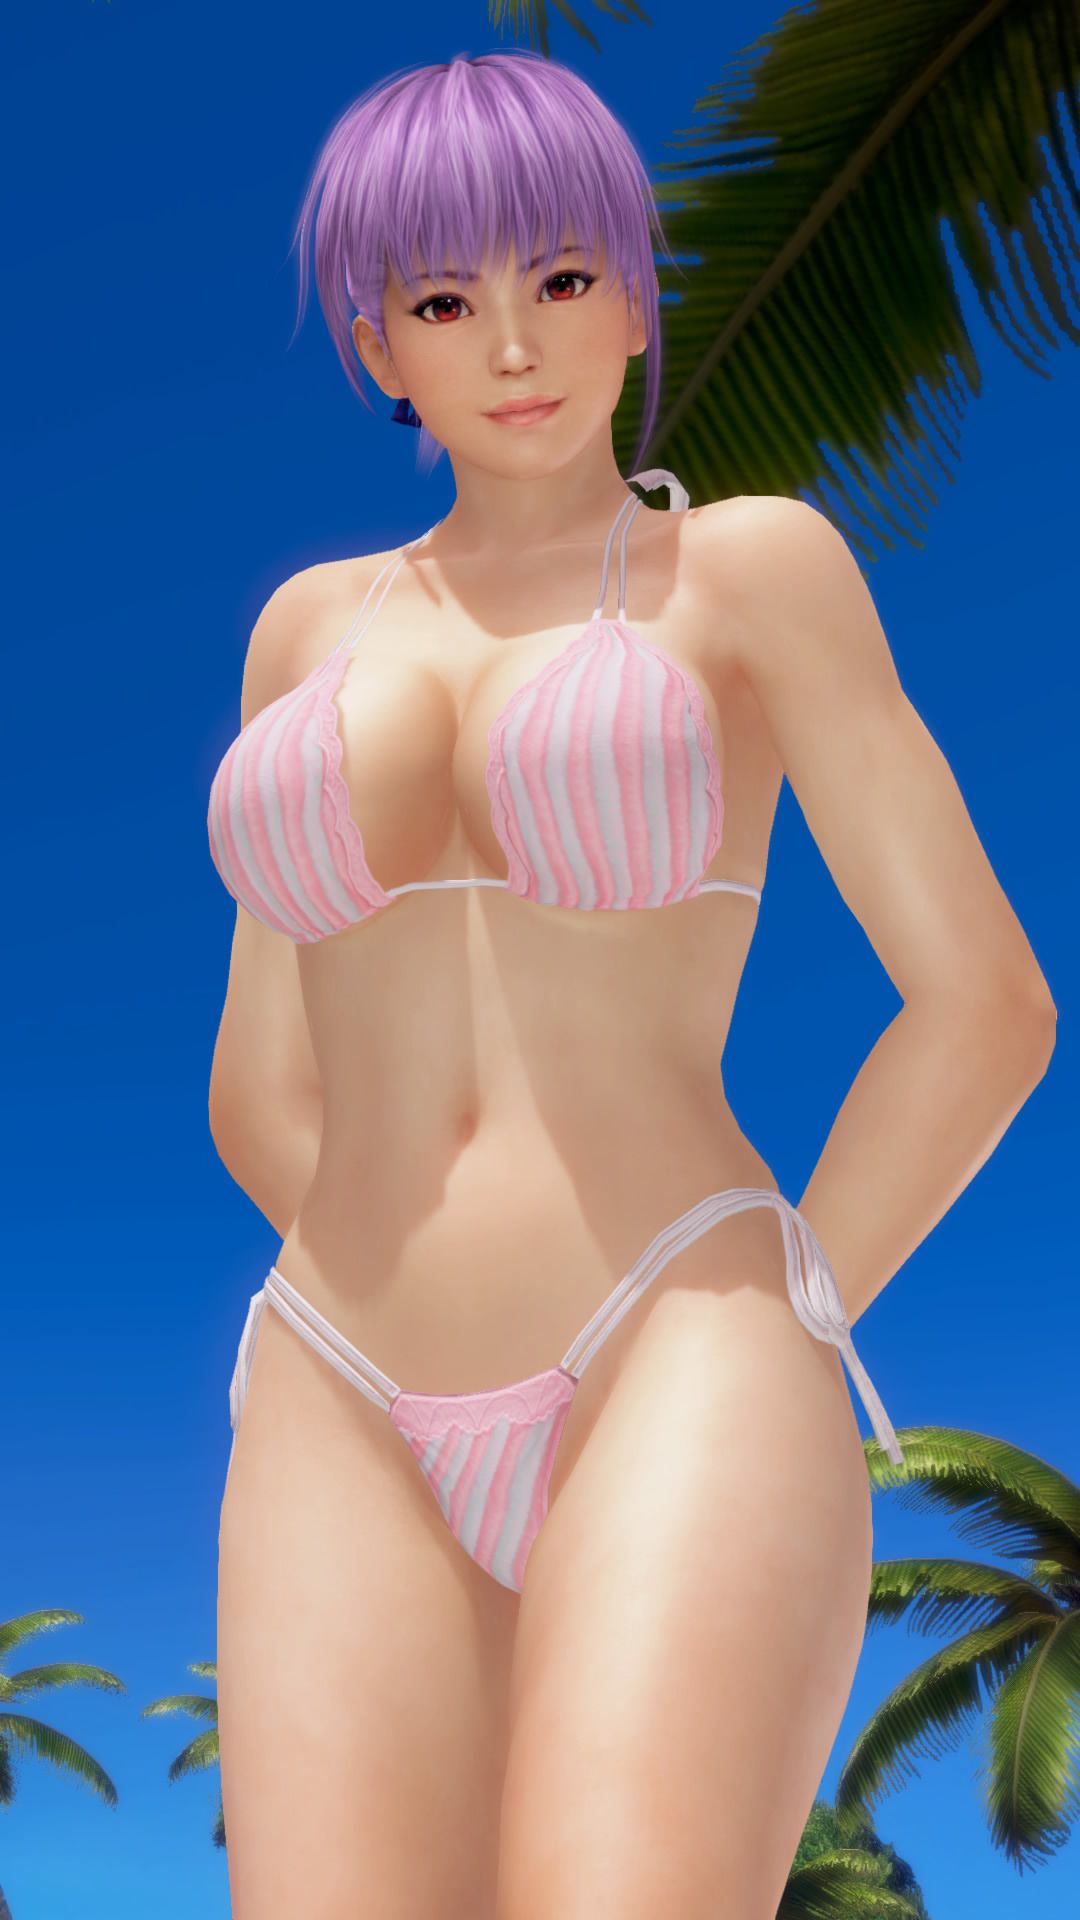 Doax3 "The color which suits the Aya-chan is pink" theory is verified 1